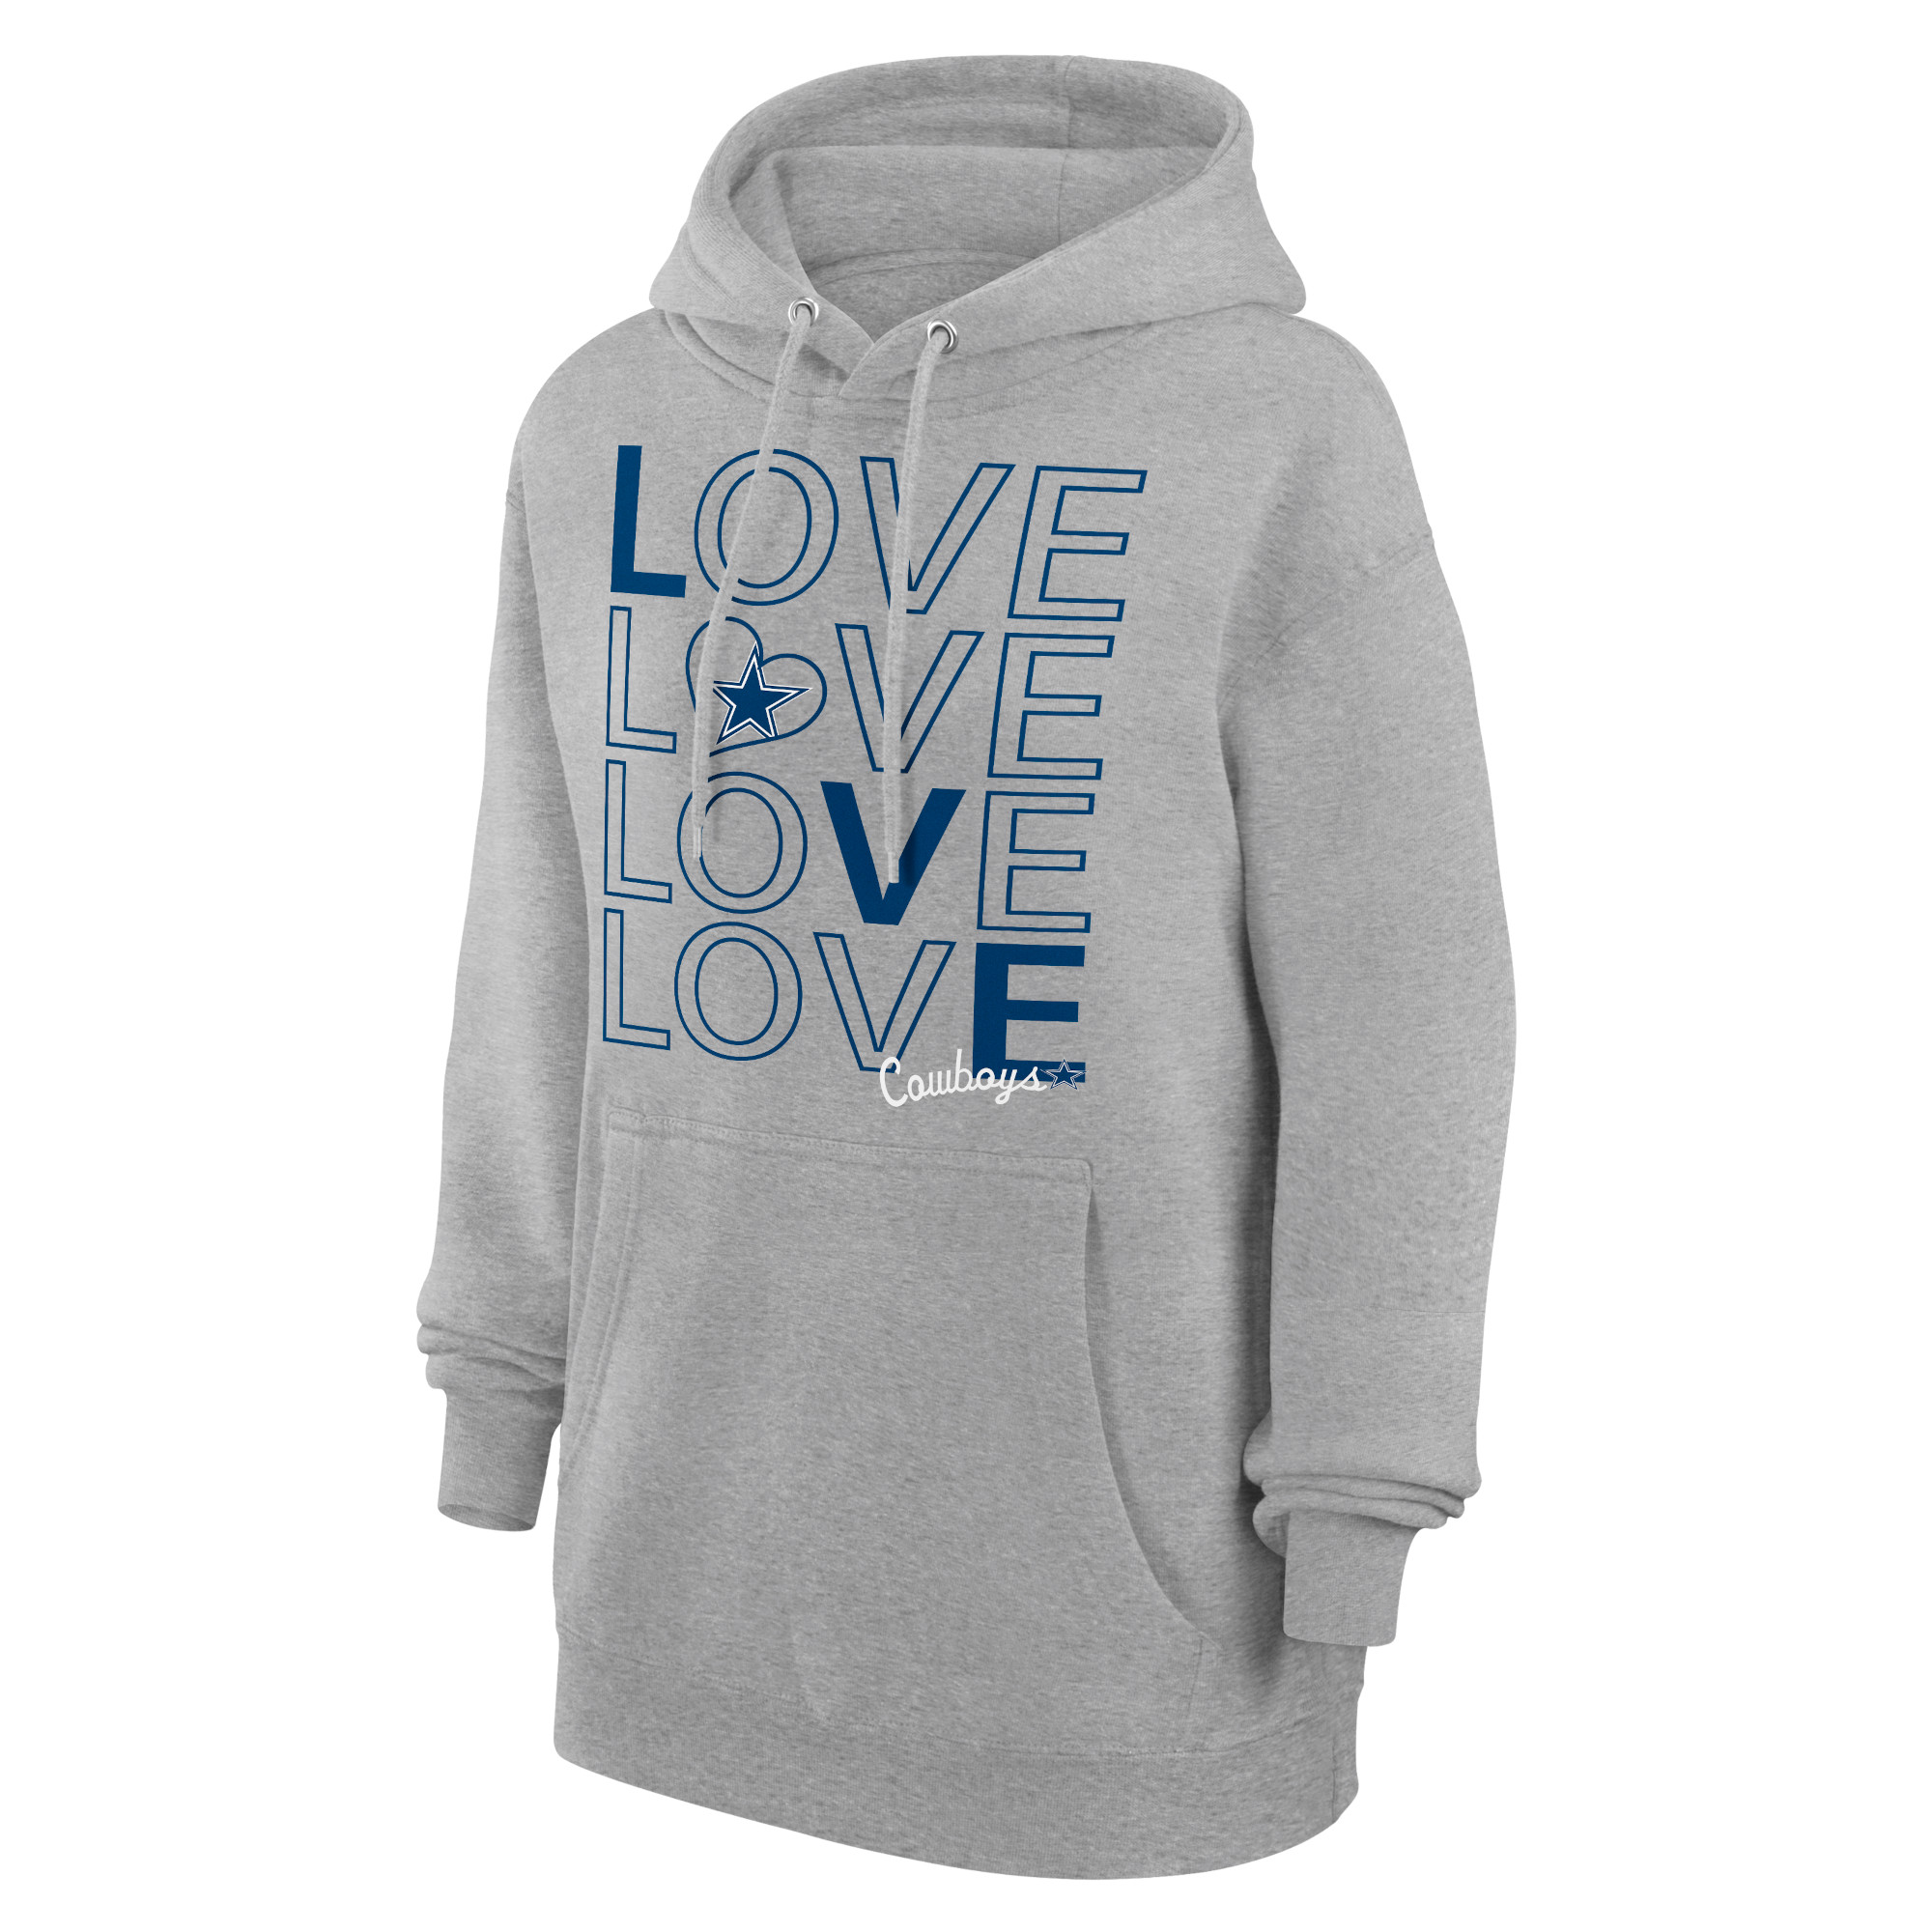 Women's G-III 4Her by Carl Banks  Heather Gray Dallas Cowboys Love Graphic Pullover Hoodie - image 2 of 3